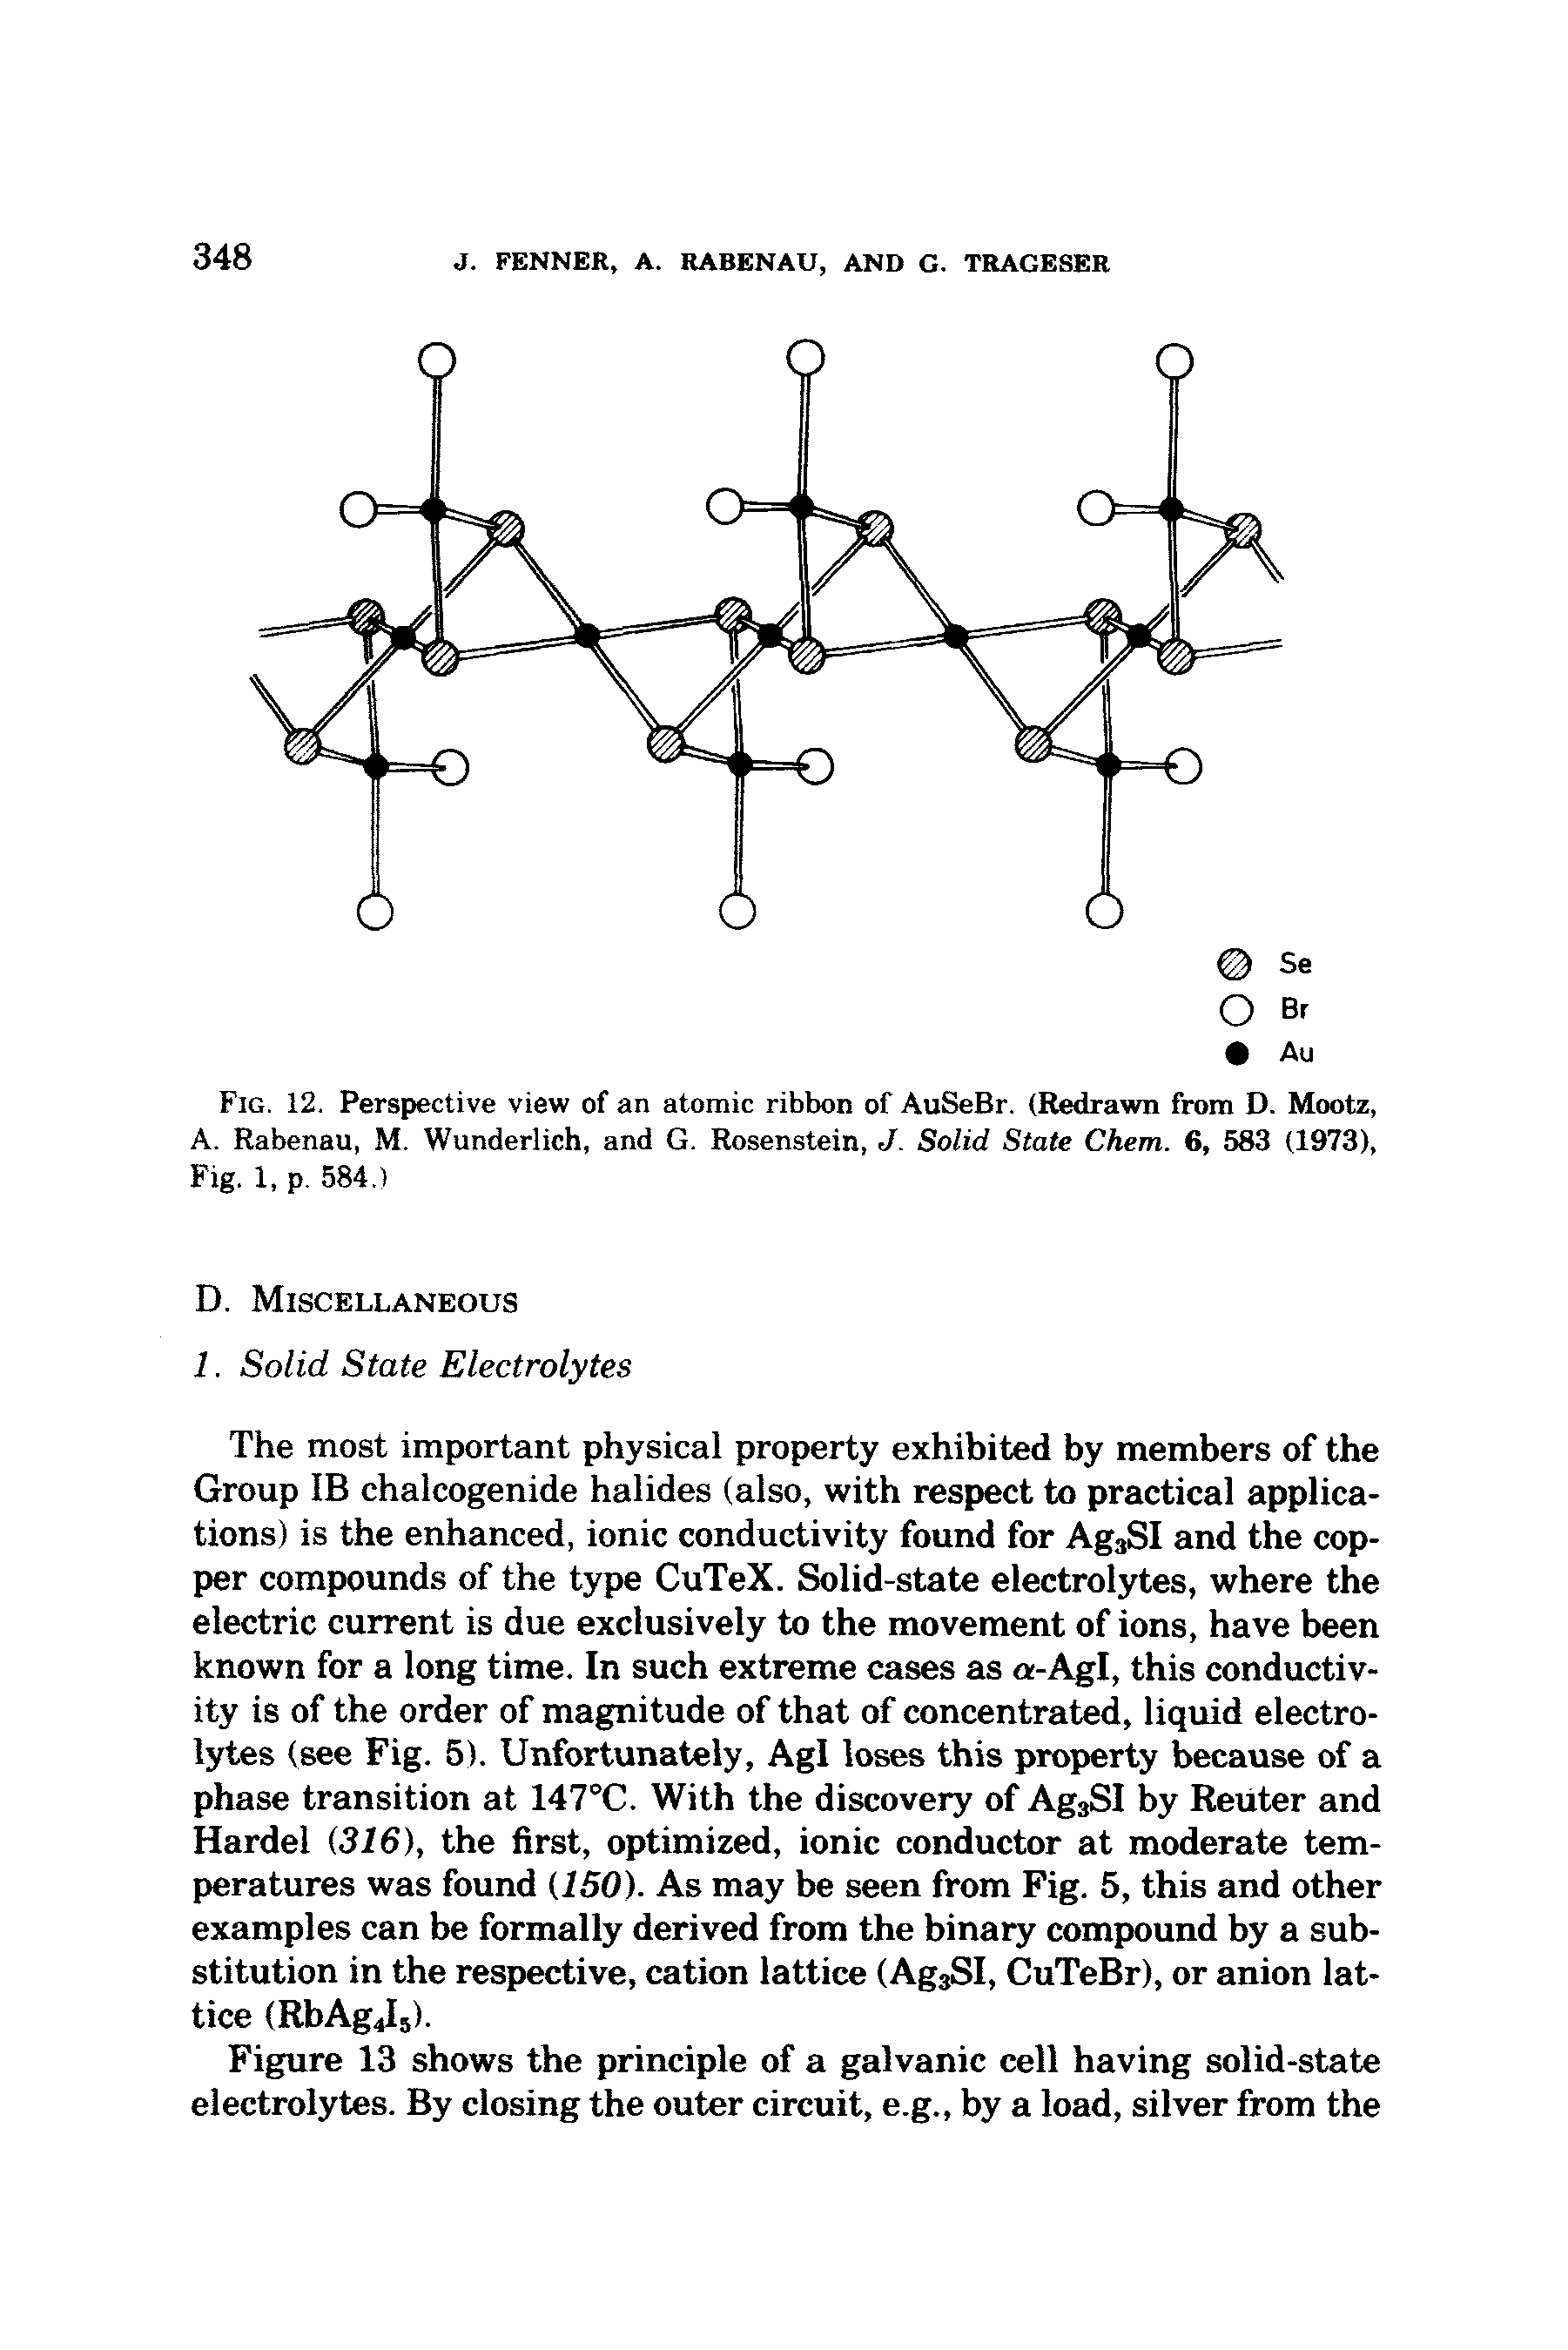 Fig. 12. Perspective view of an atomic ribbon of AuSeBr. (Redrawn from D. Mootz, A. Rabenau, M. Wunderlich, and G. Rosenstein, J. Solid State Chem. 6, 583 (1973), Fig. 1, p. 584.)...